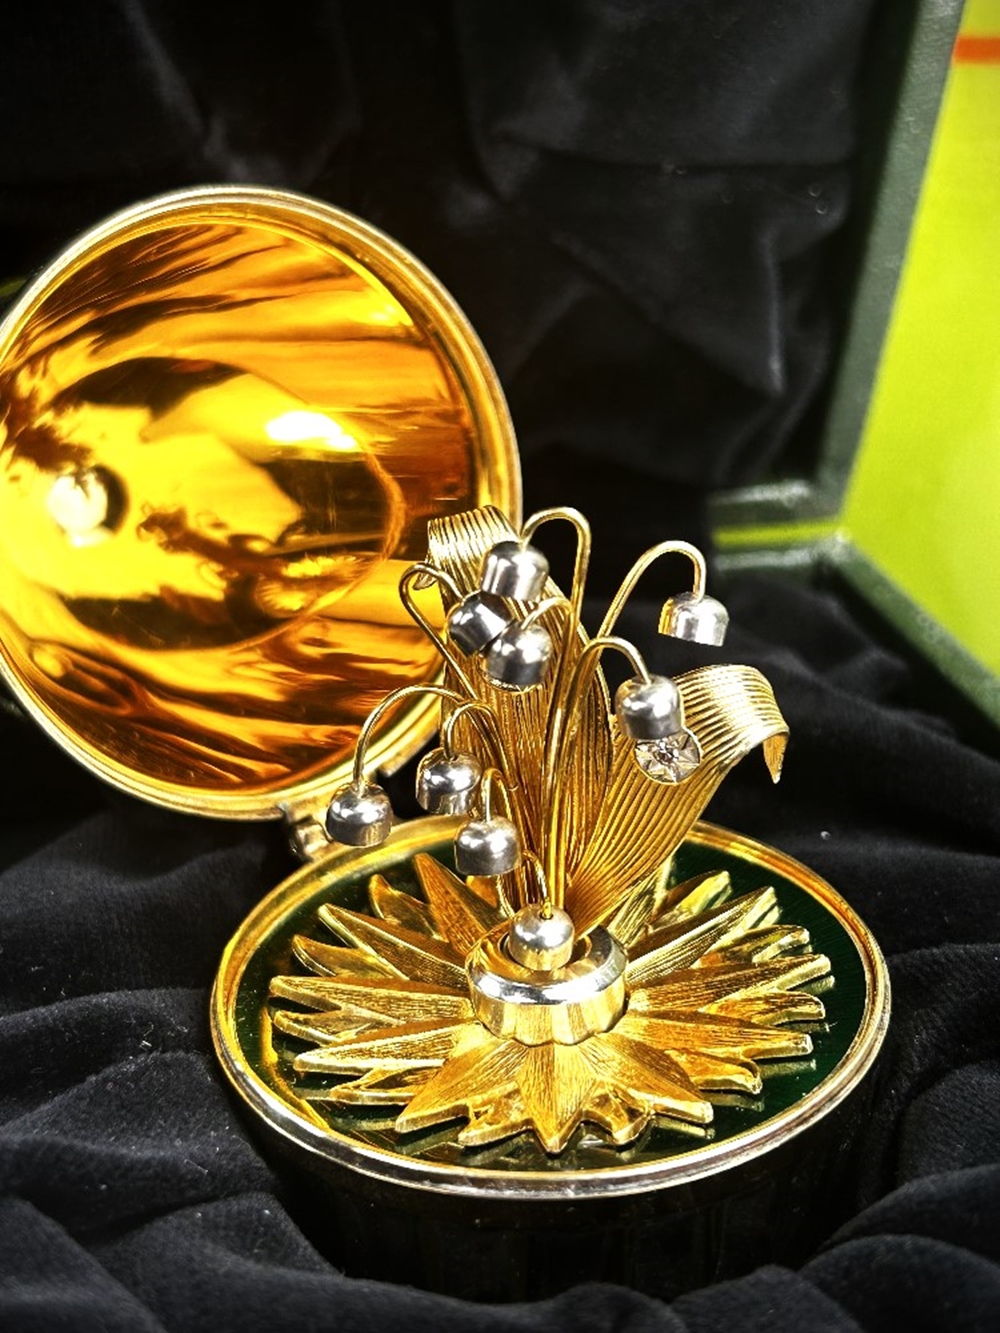 Faberg&eacute; Solid Silver &#038; Gold Plate Egg With Diamond Lily Of The Valley Brooch